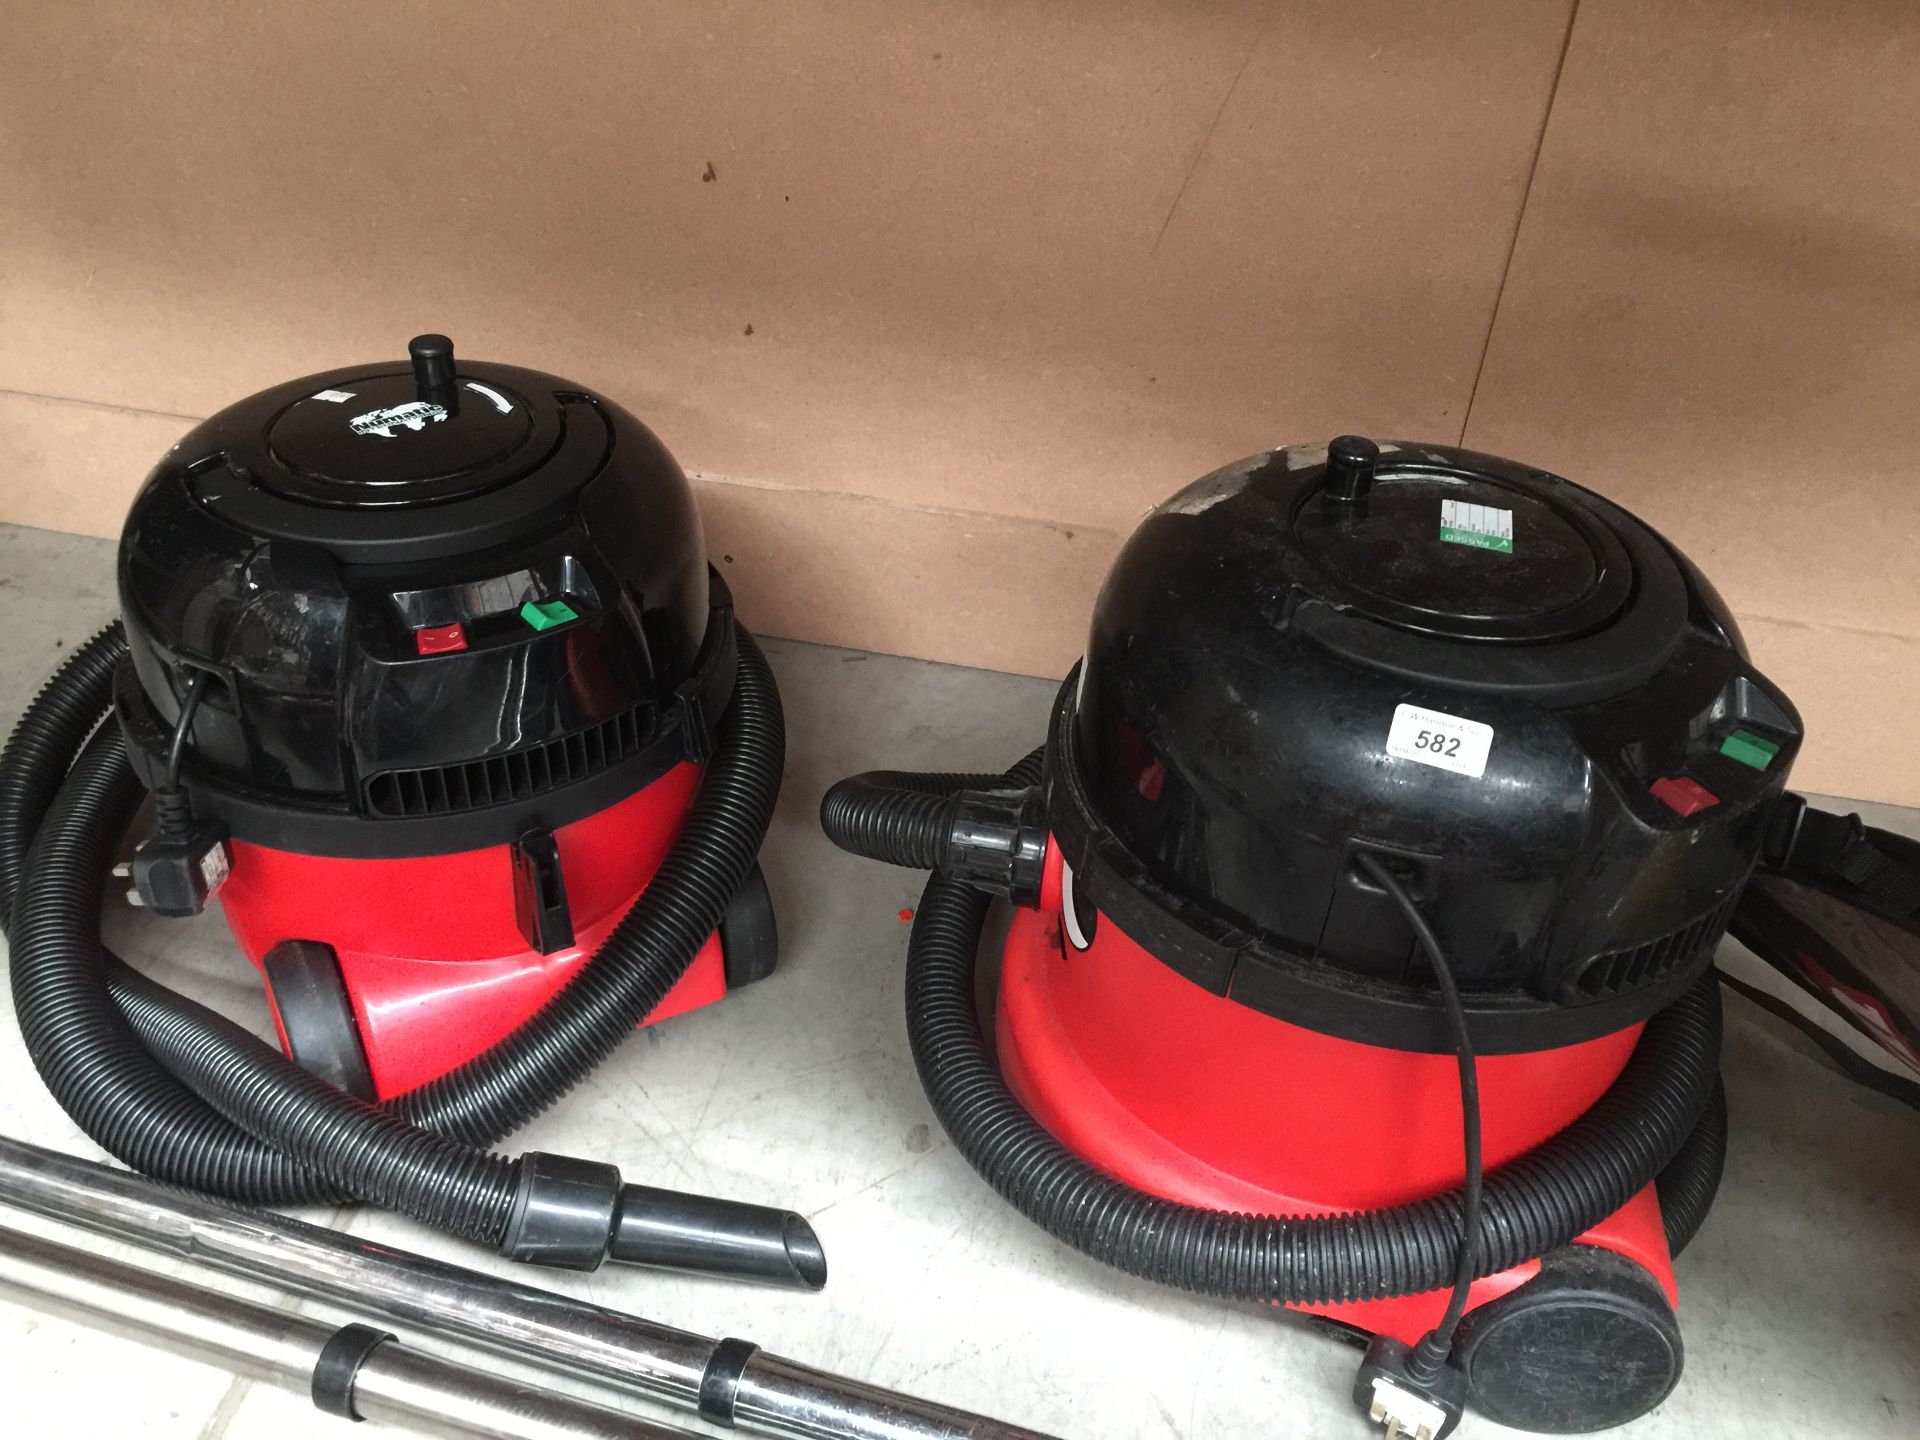 2 x Numatic tub vacuum cleaners - 240v, complete with attachments